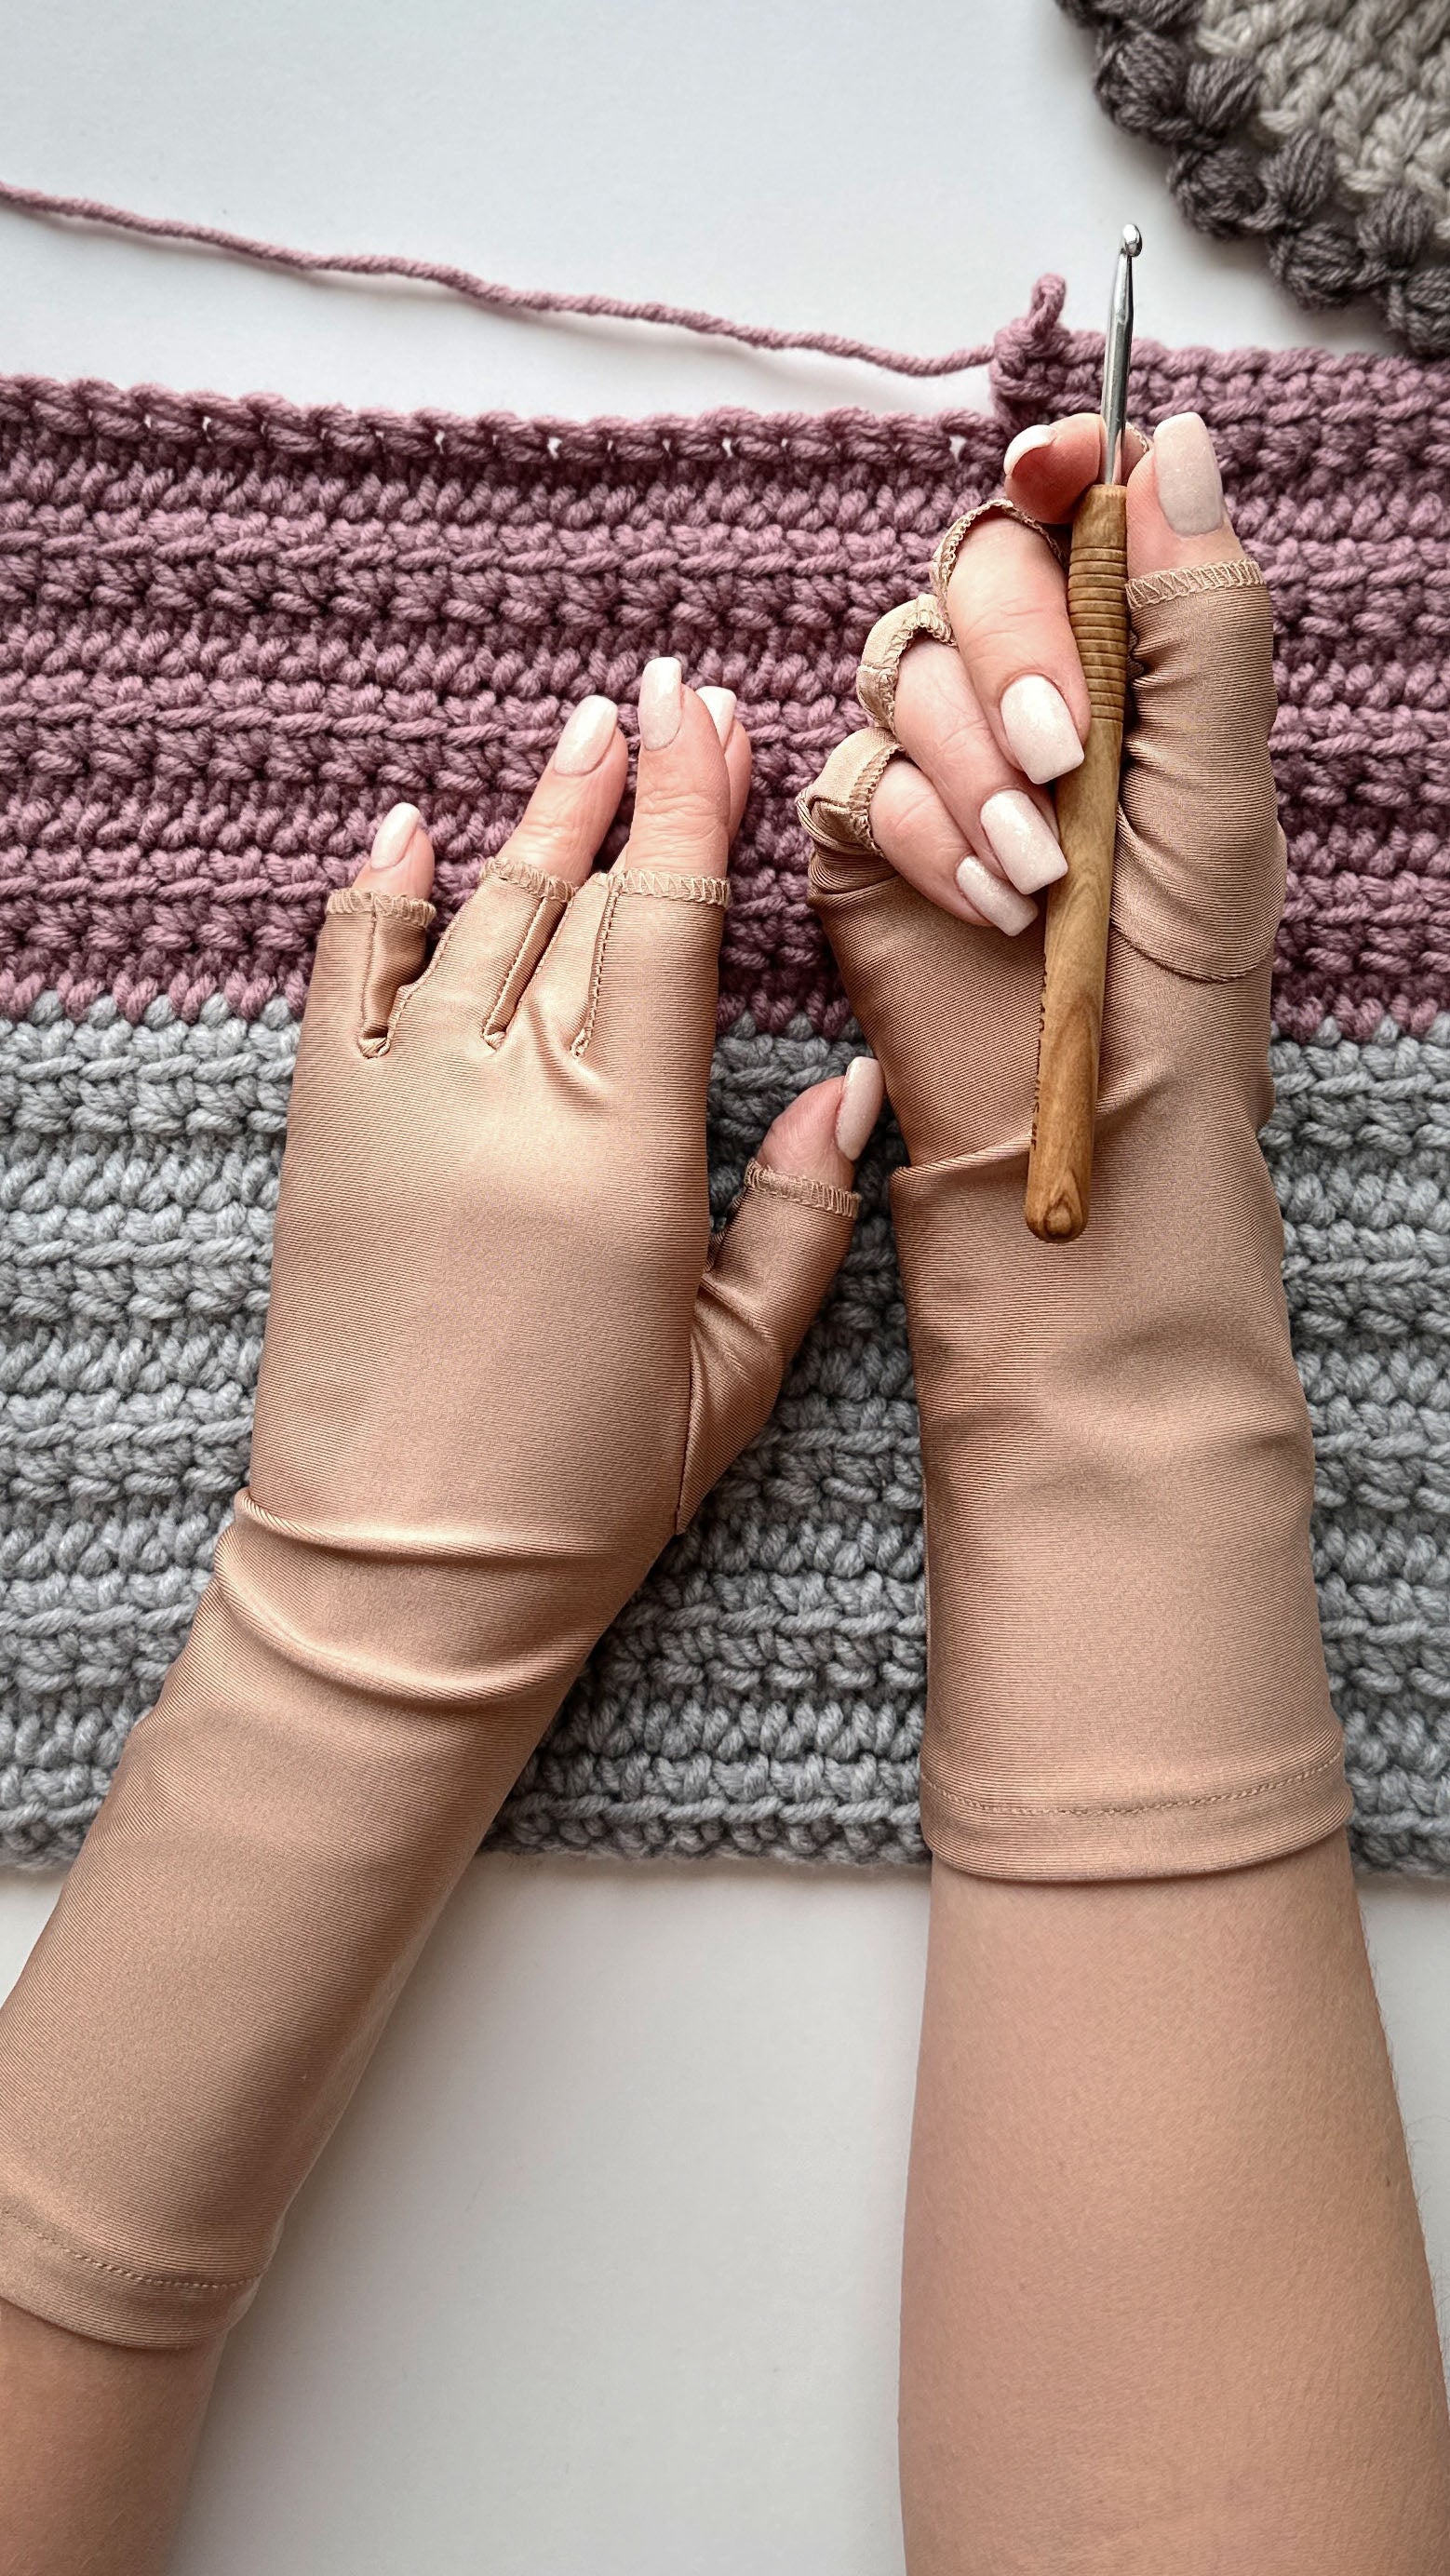 Compression Glove for Crocheting by TheMailoDesign